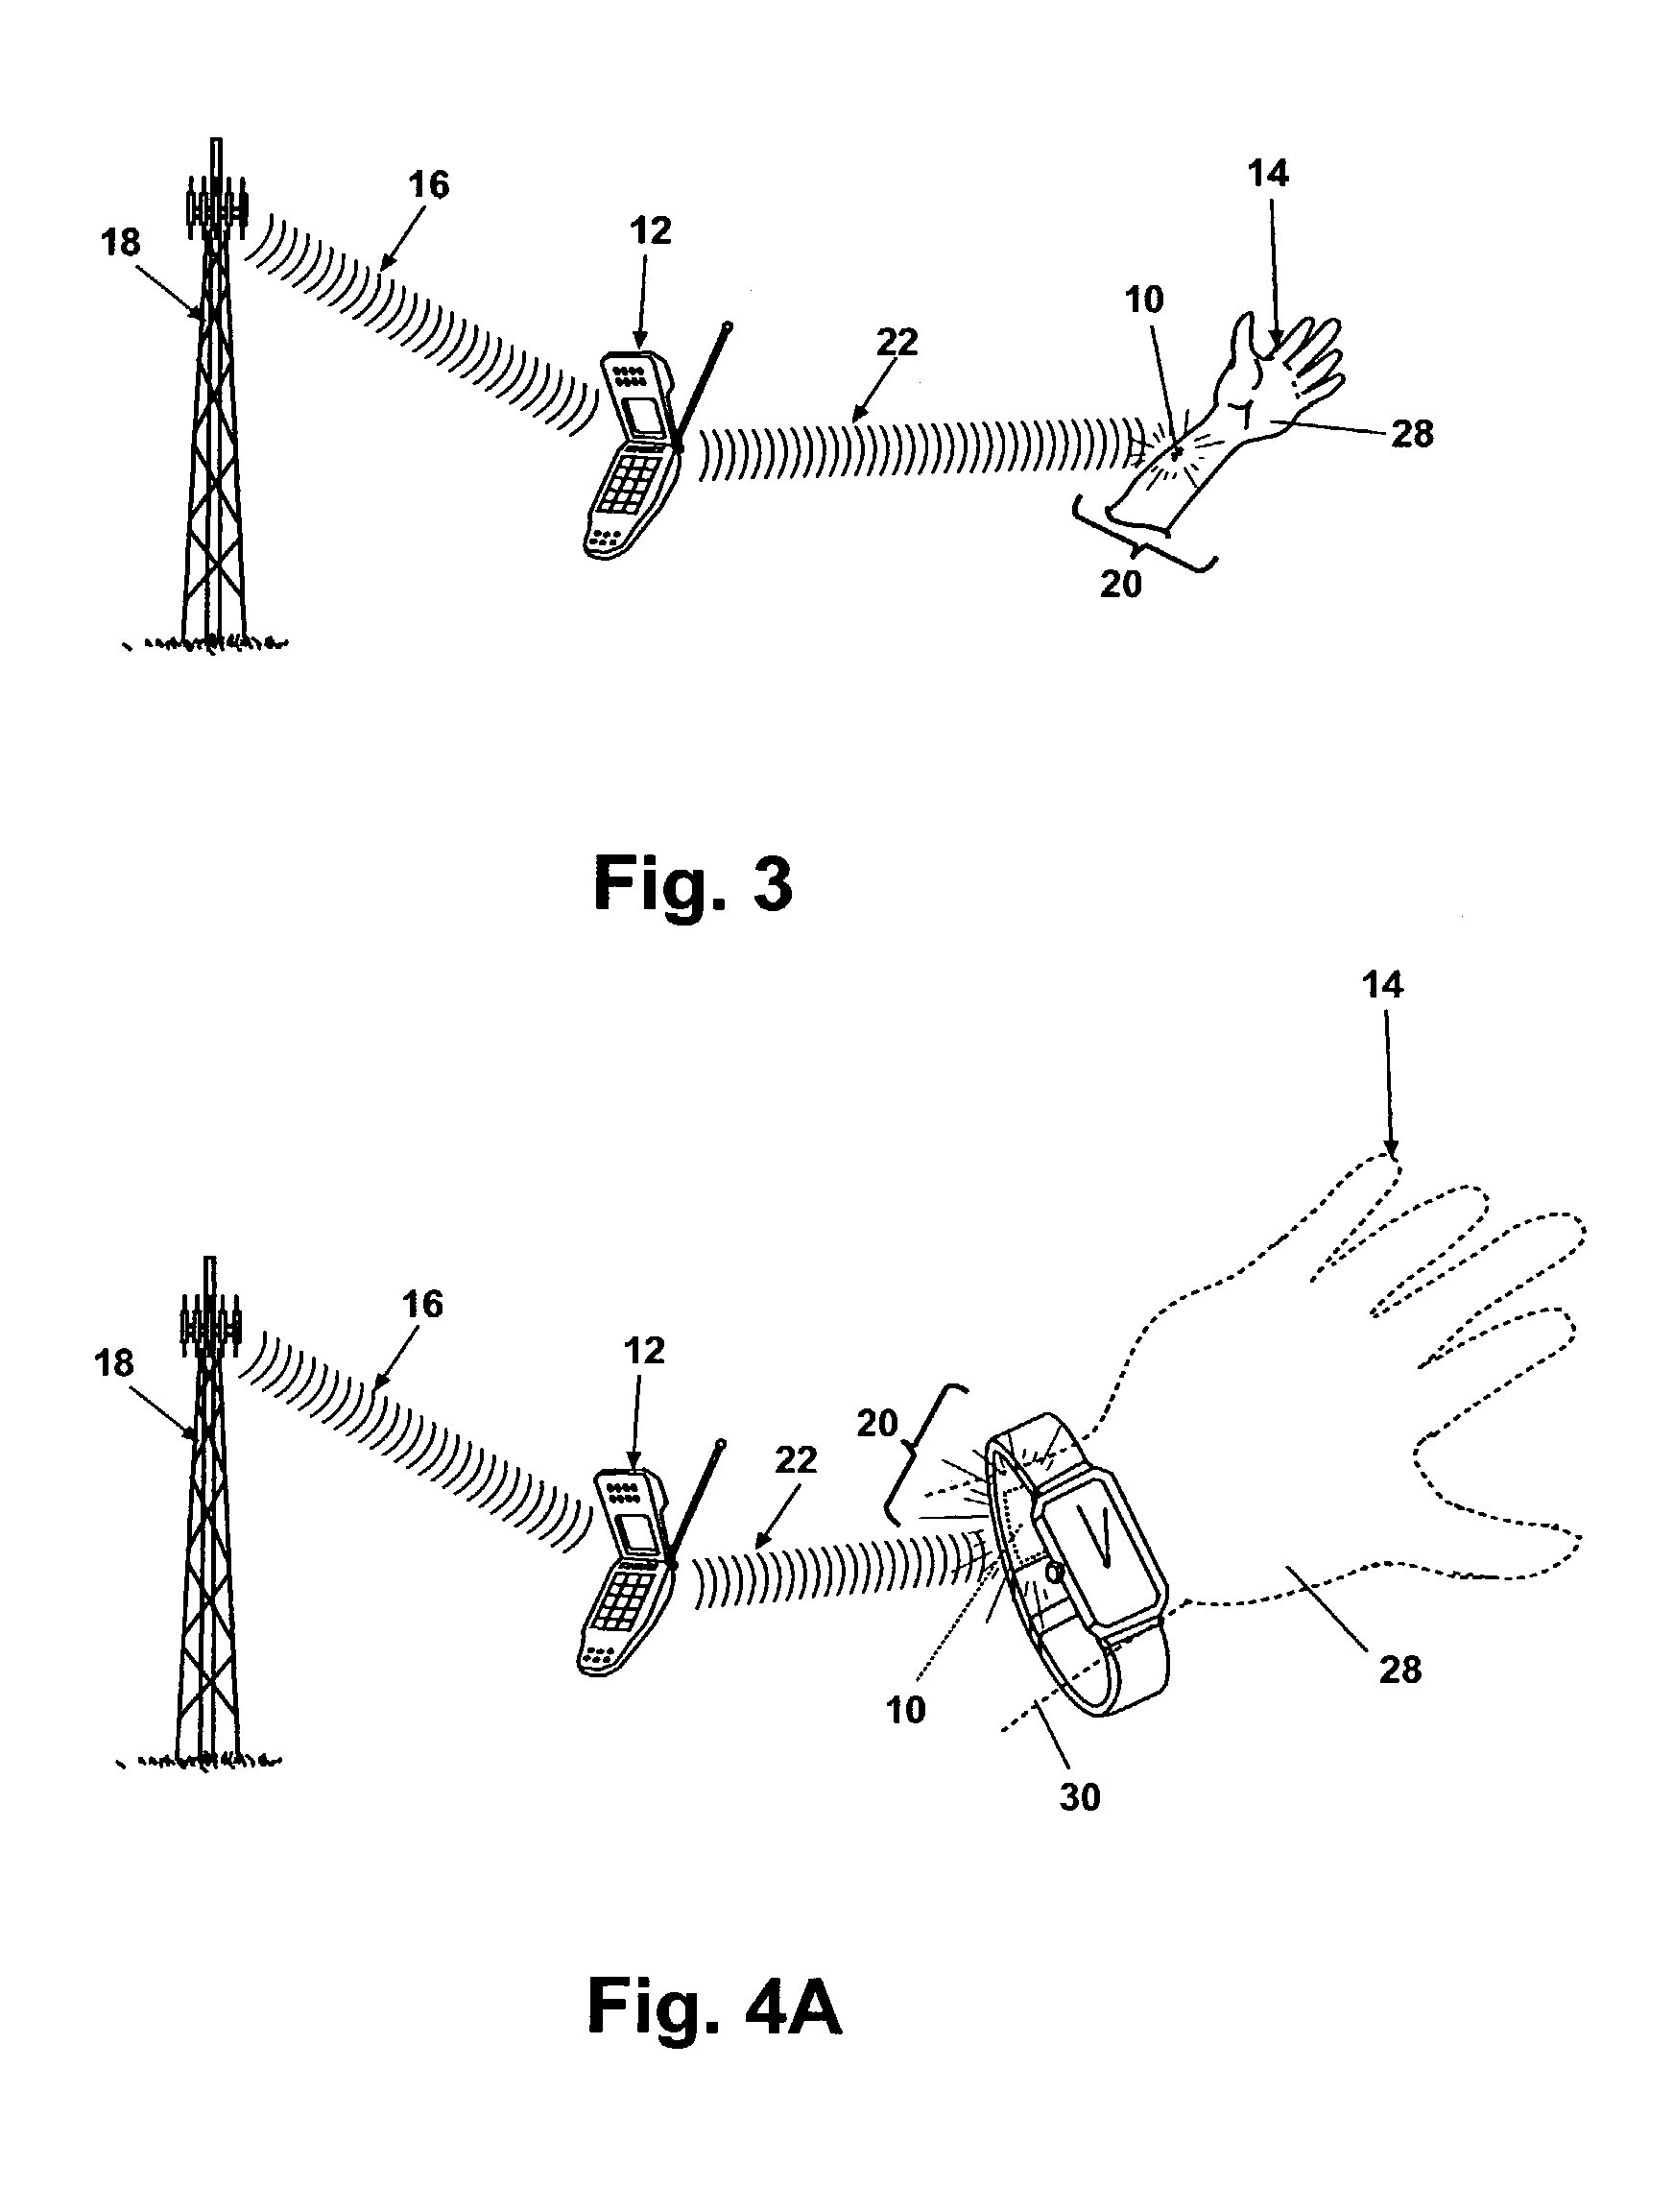 User-based signal indicator for telecommunications device and method of remotely notifying a user of an incoming communications signal incorporating the same